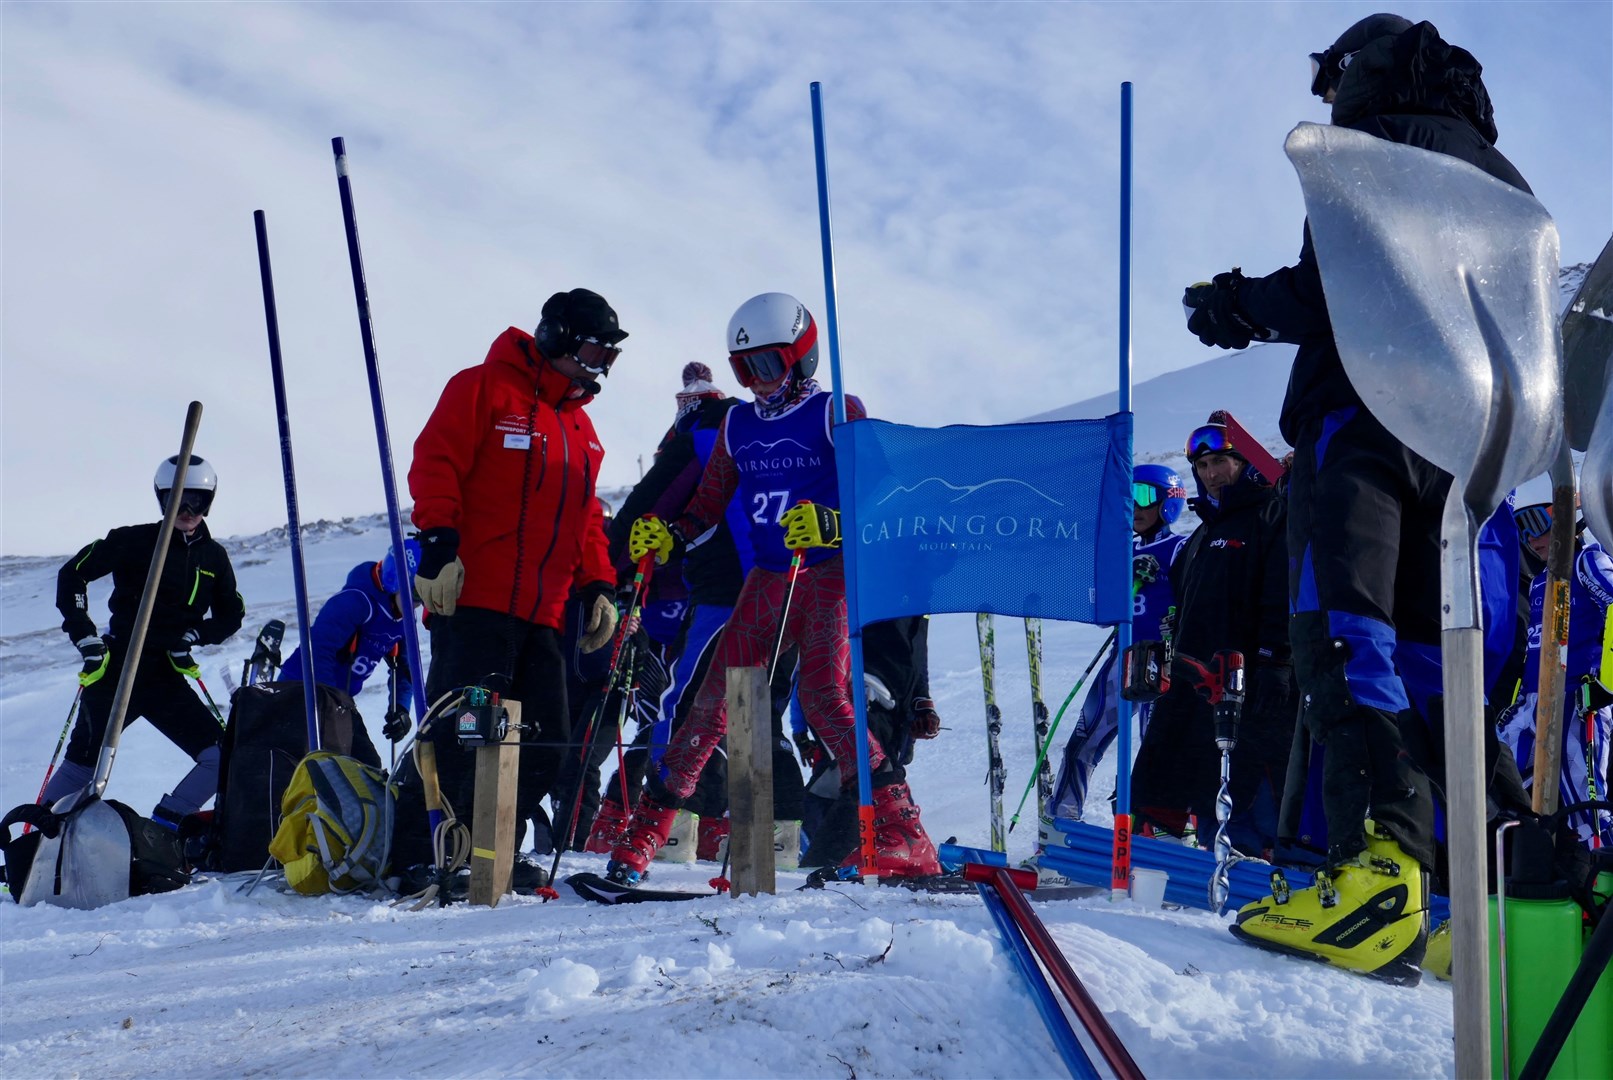 After several years, the luxury of two full days' racing on the hill returned and they were all raring to go at the White Lady giant slalom start gate on Saturday.